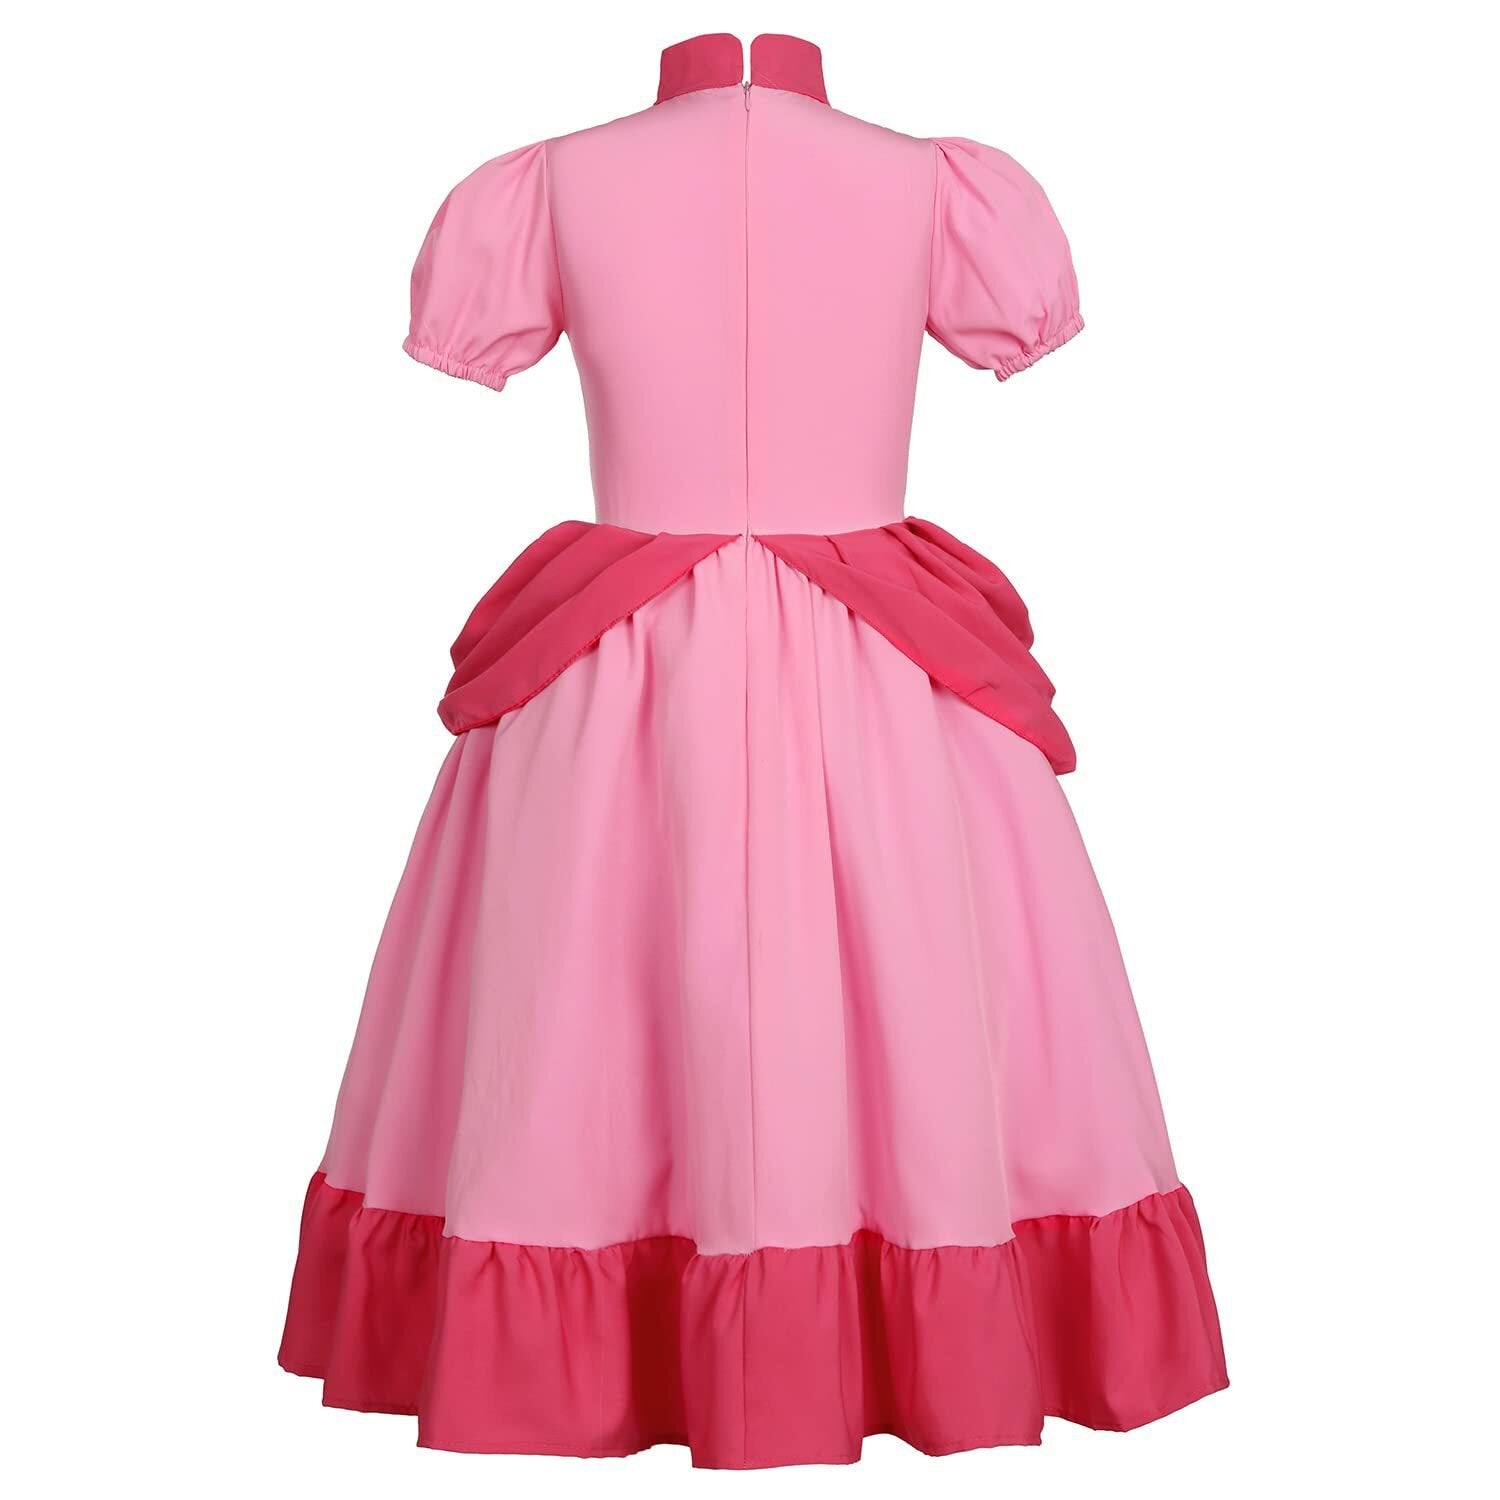 Princess Peach Costume for Girls and Adults